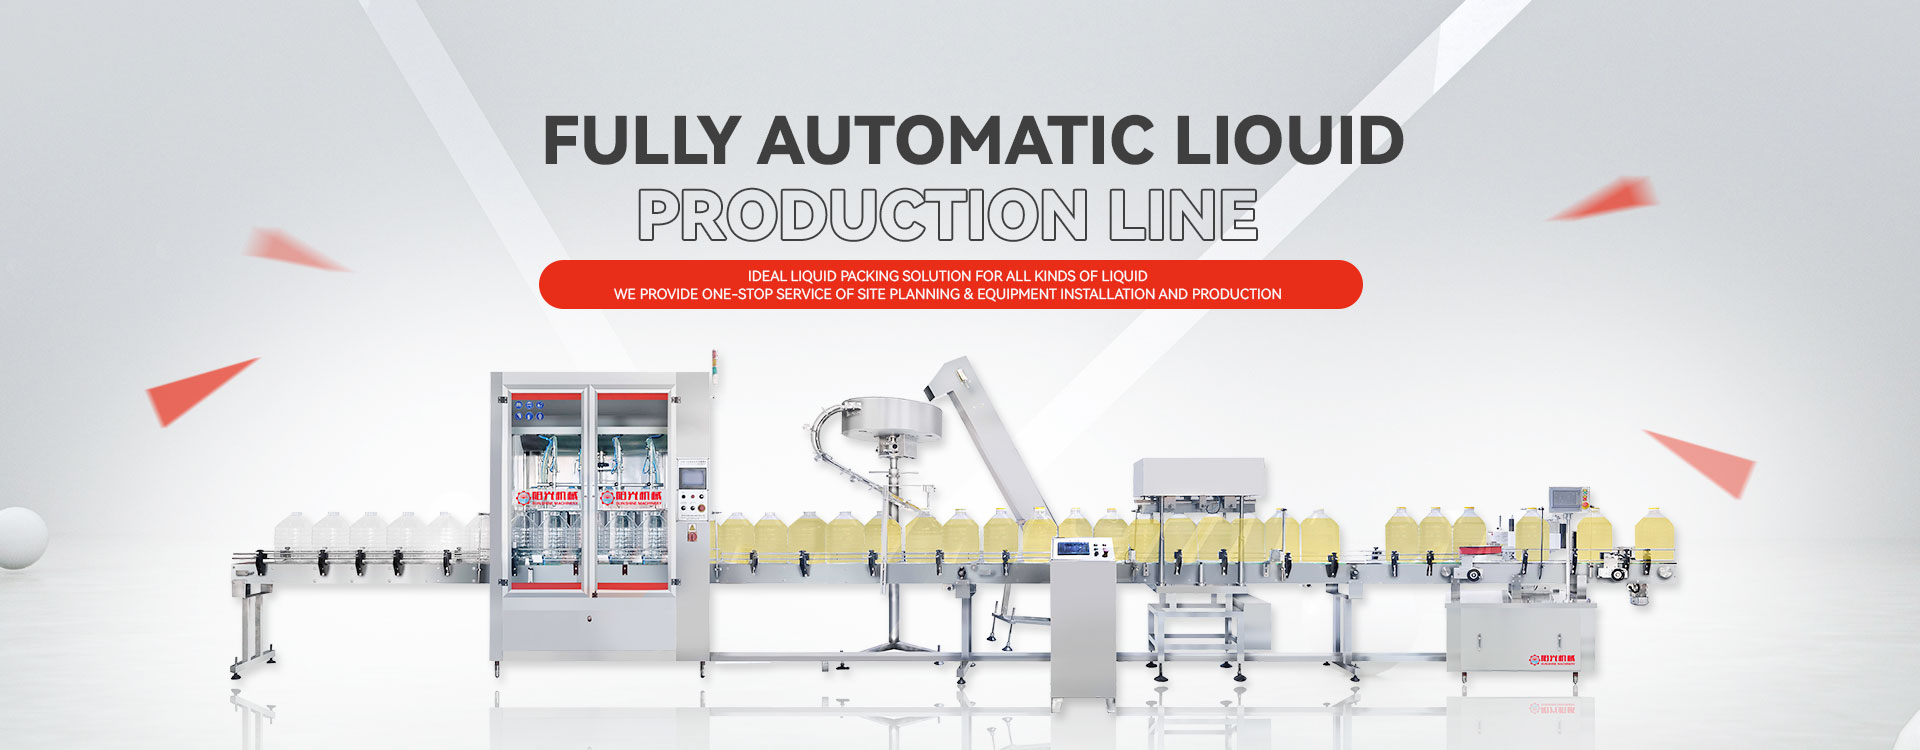 FULLY AUTOMATIC LIOUID PRODUCTION LINE